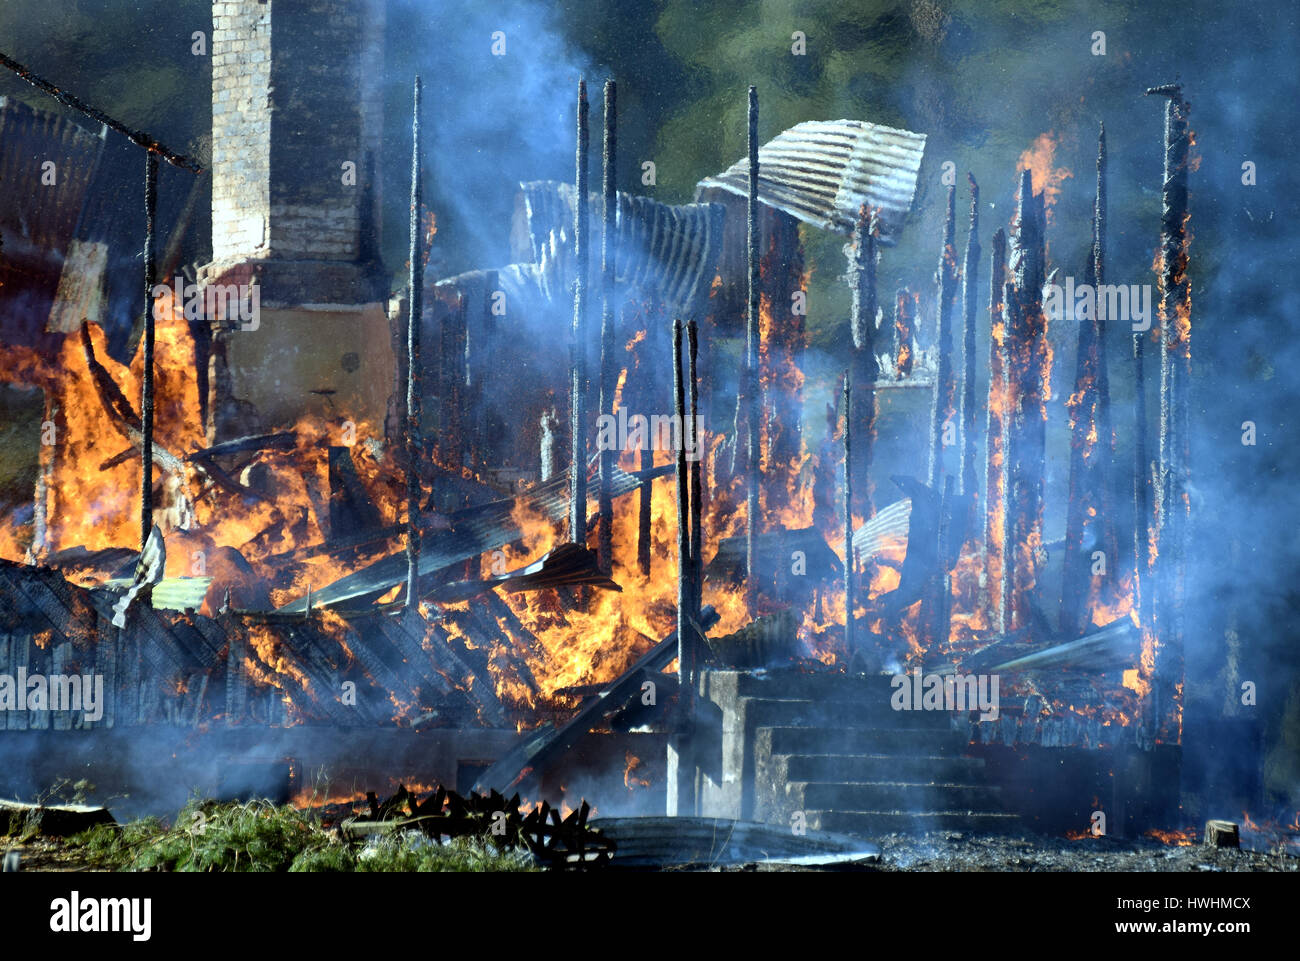 House completely engulfed in flames Stock Photo